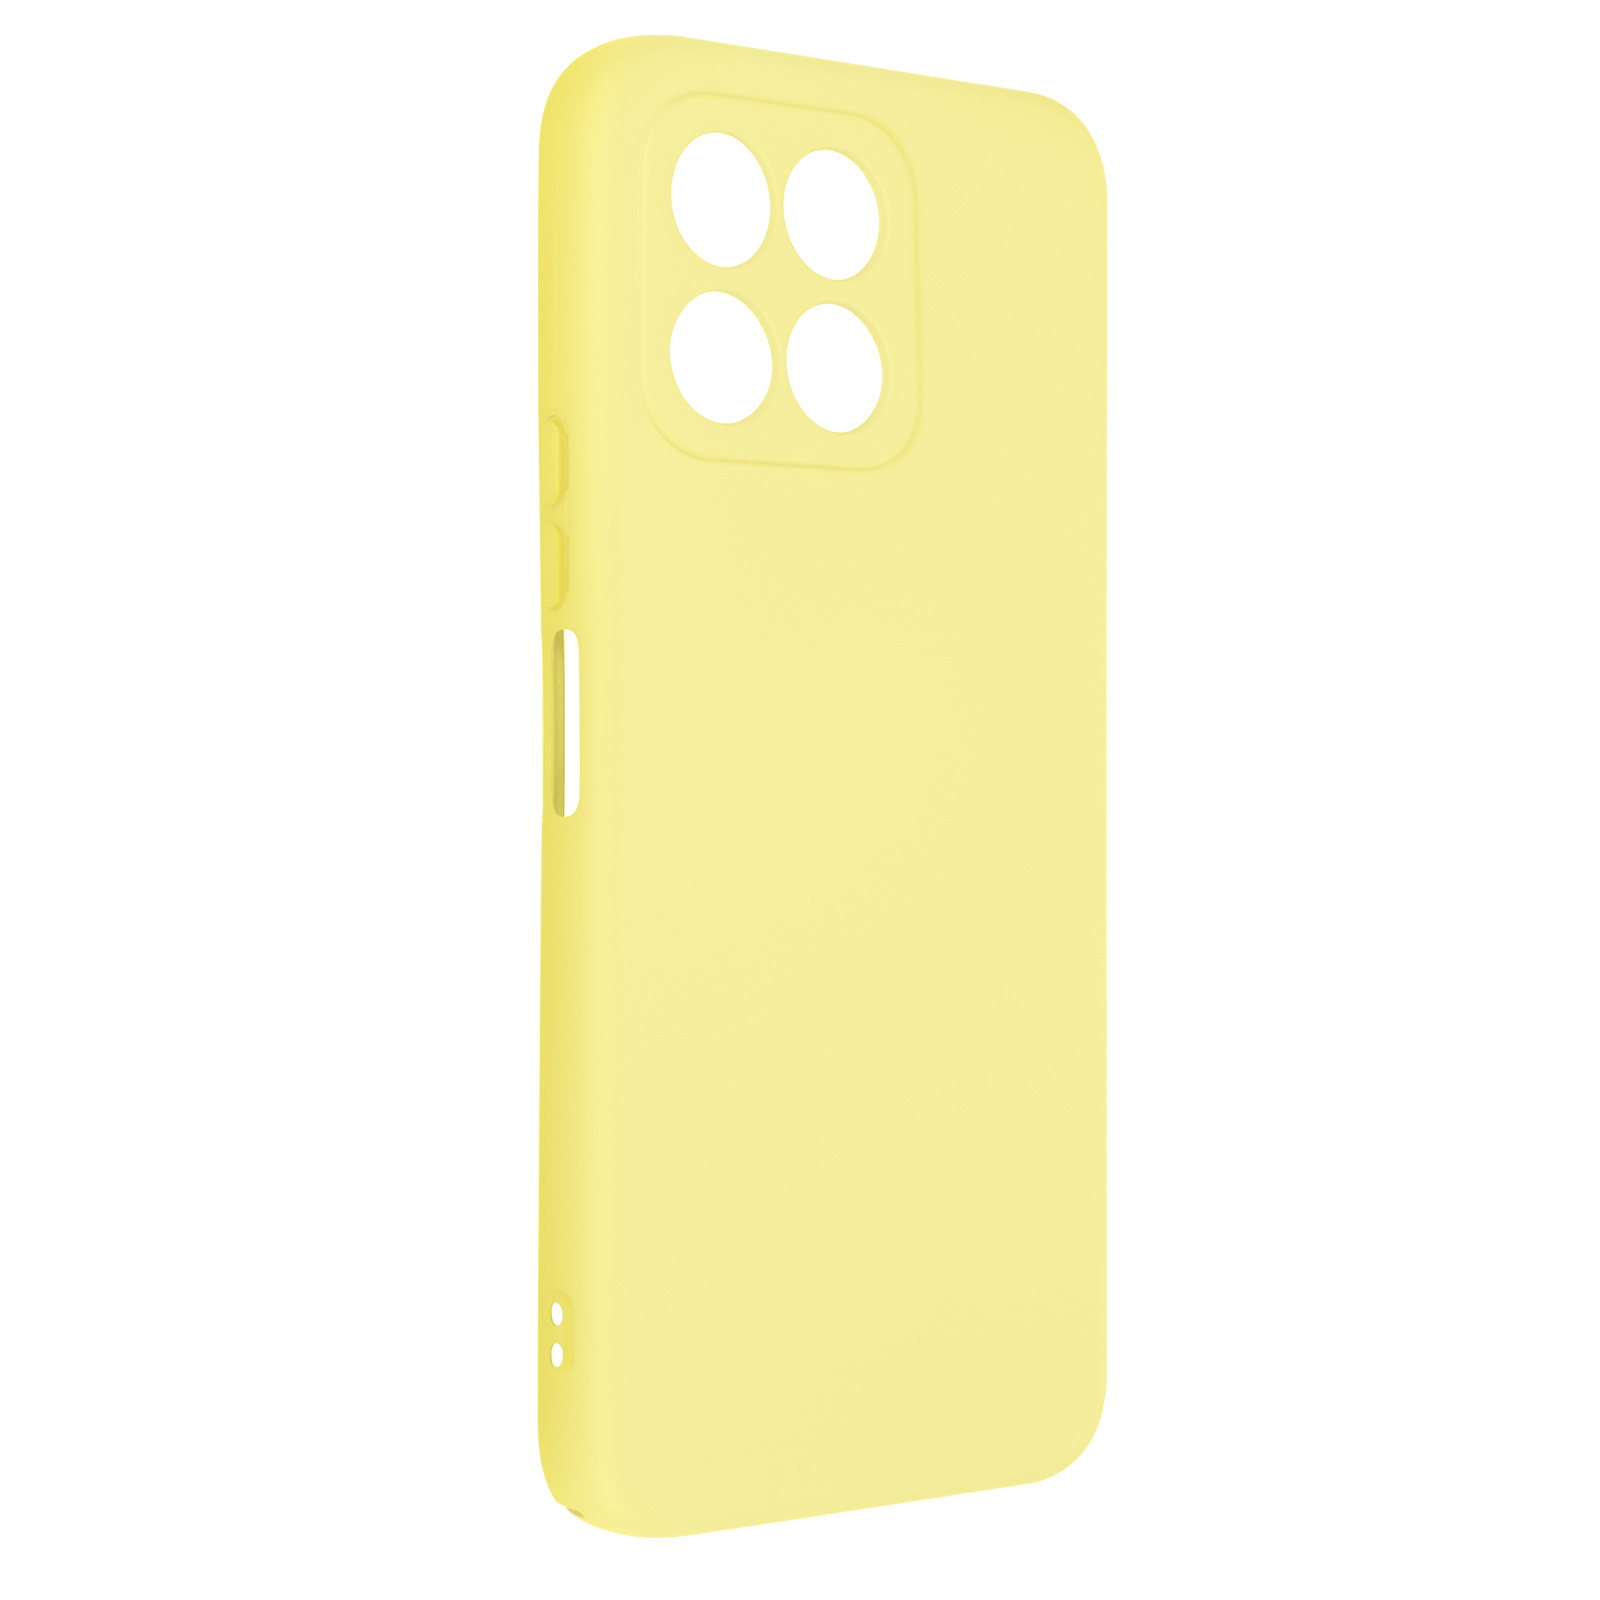 Series, Soft Lite, AVIZAR Gelb Touch Backcover, 70 Honor,